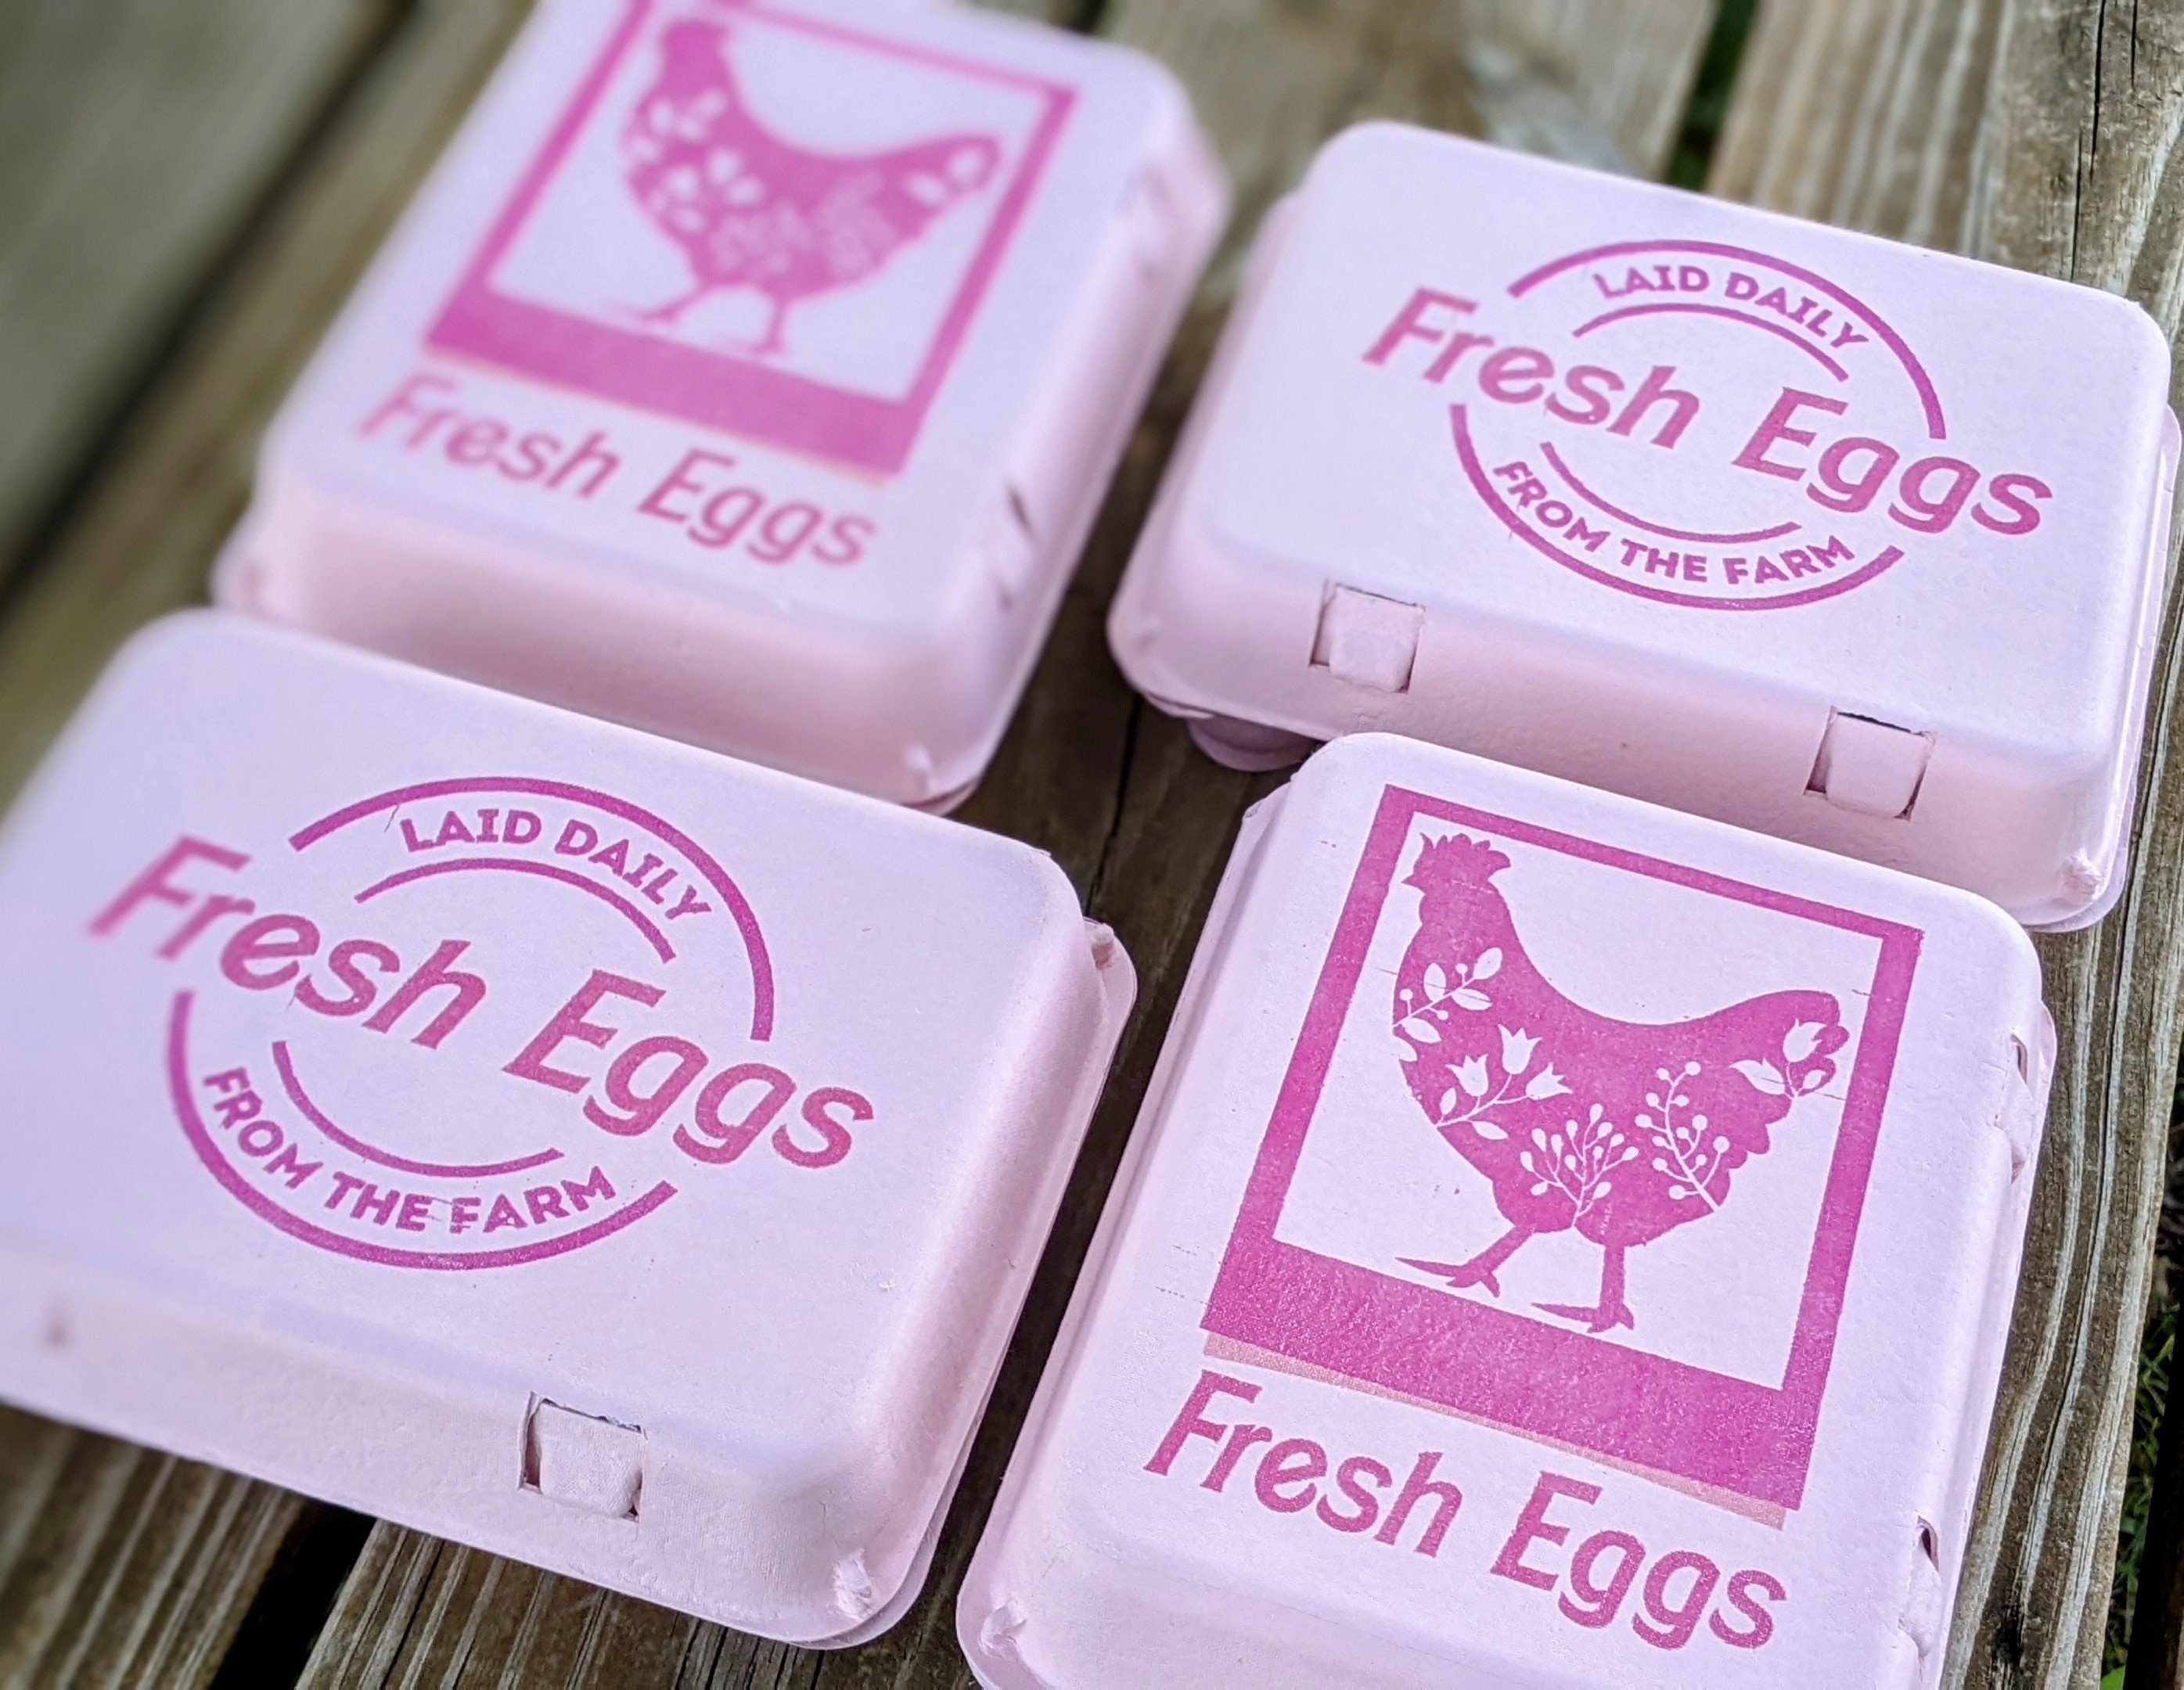 Fresh From the Nest - Unwashed Egg Carton Stamp